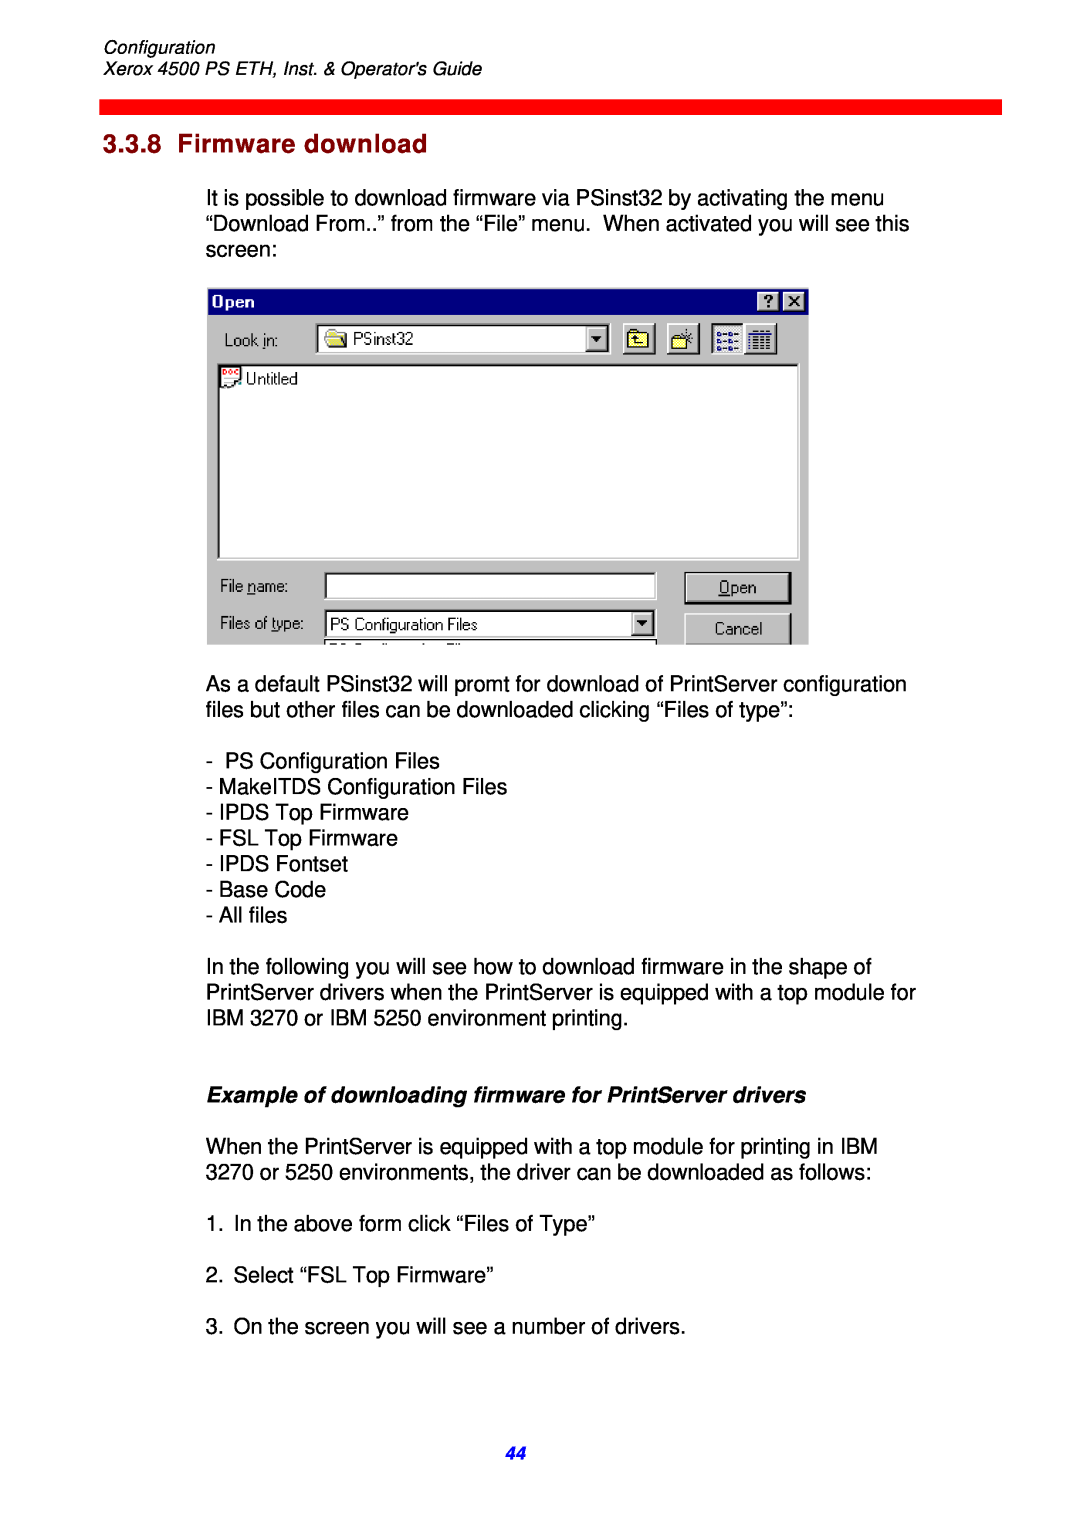 Xerox 4500 ps eth instruction manual Firmware download, Example of downloading firmware for PrintServer drivers 